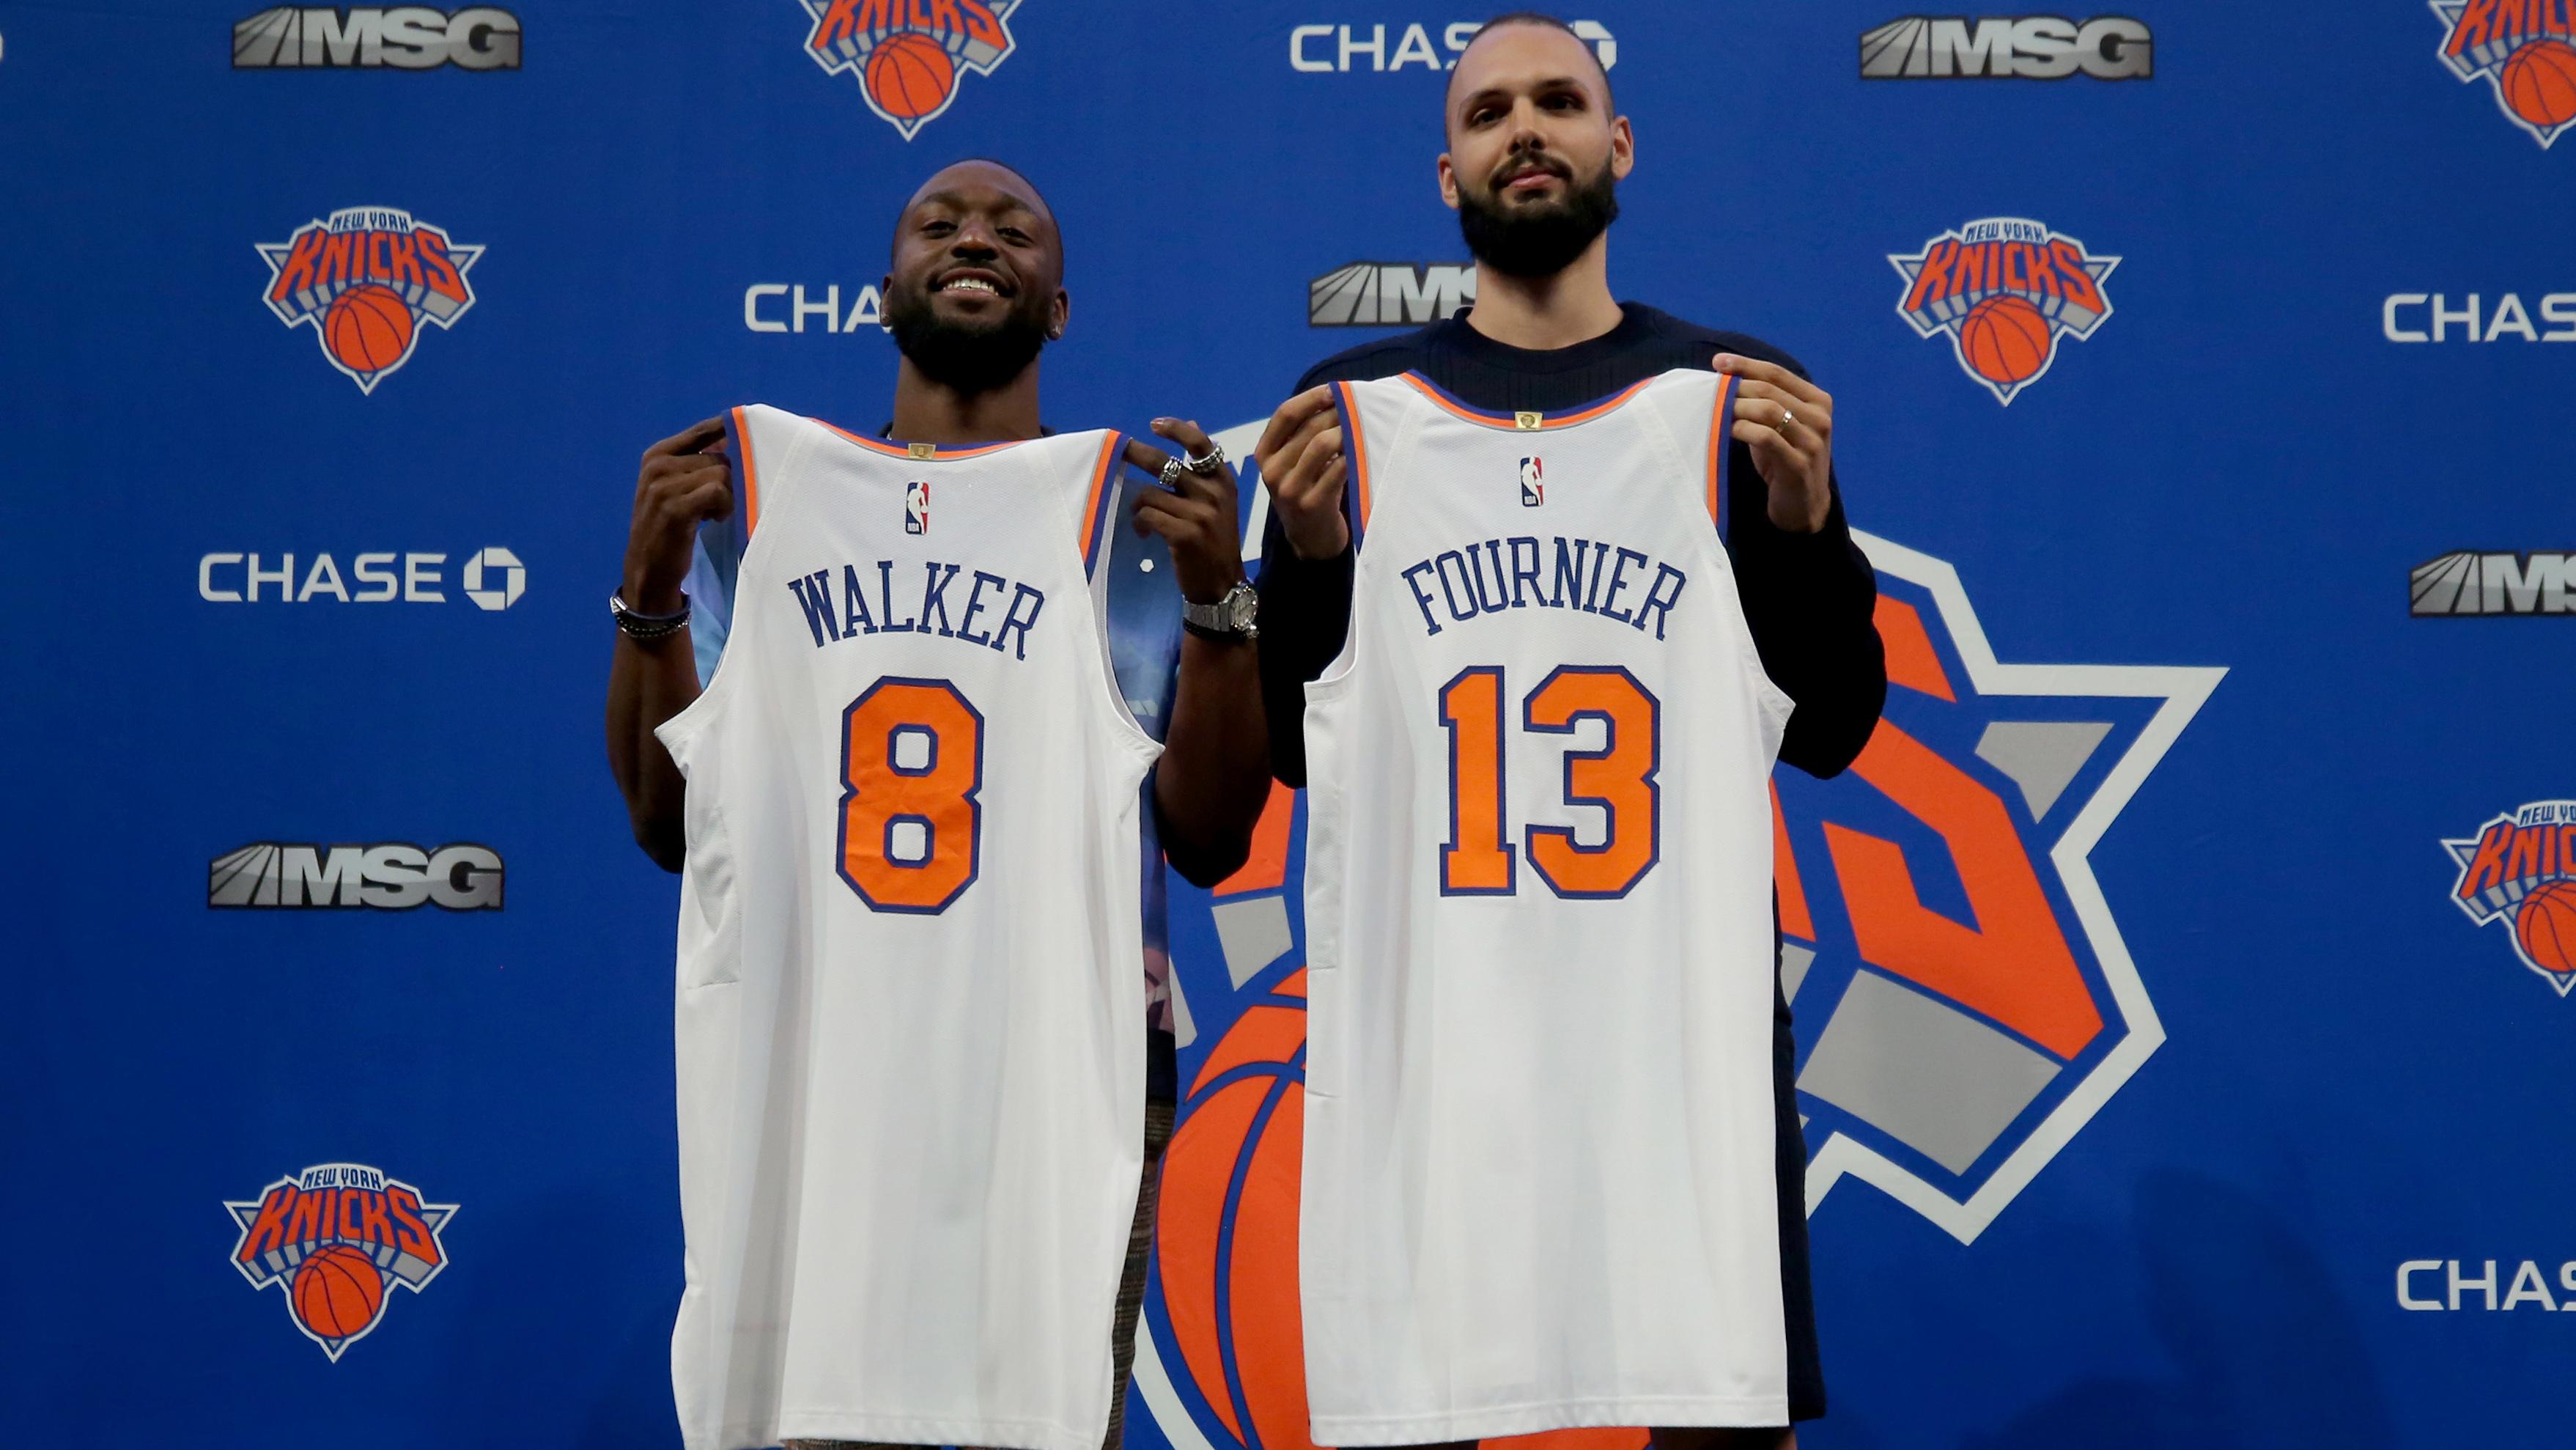 New York Knicks guards Kemba Walker (8) and Evan Fournier (13) pose for a photo during their introductory press conference at Madison Square Garden. / Brad Penner-USA TODAY Sports